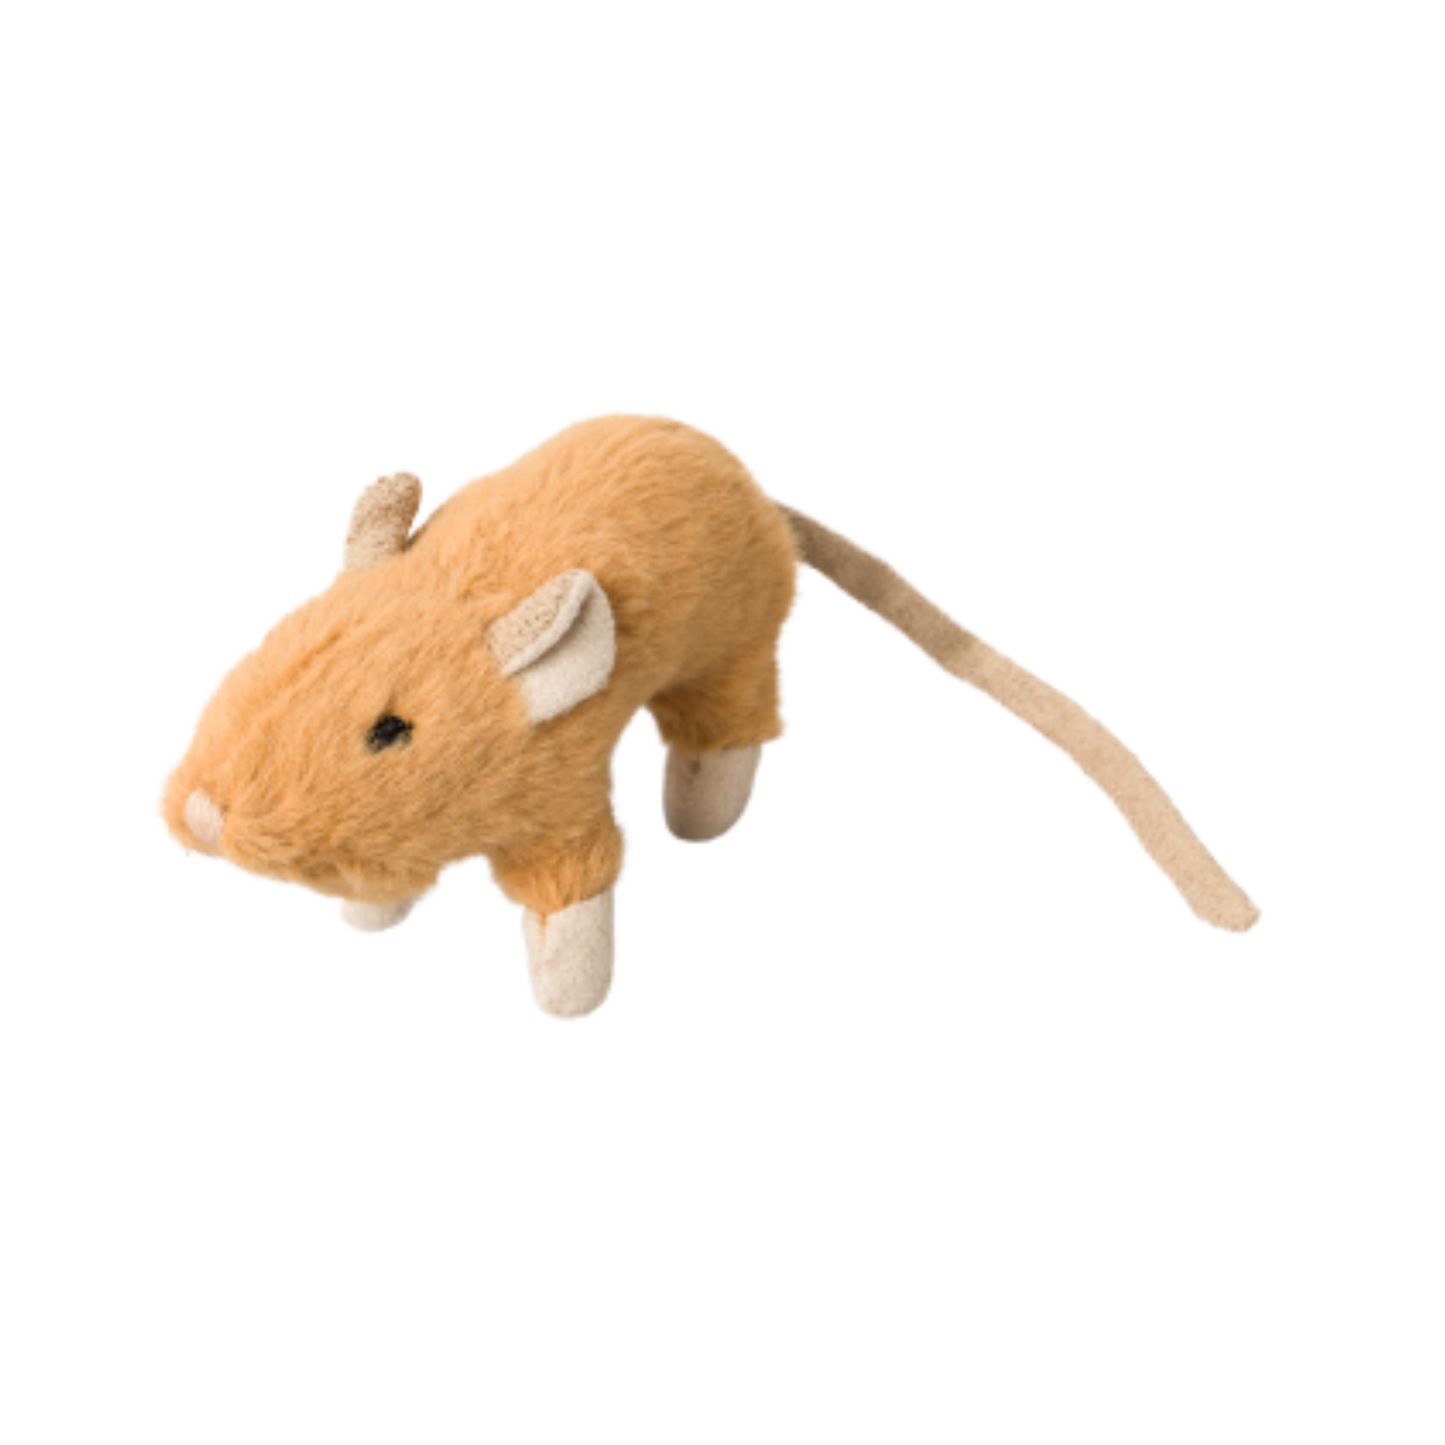 Spot House Mouse Helen Catnip Toy 4" Long - Assorted Colors